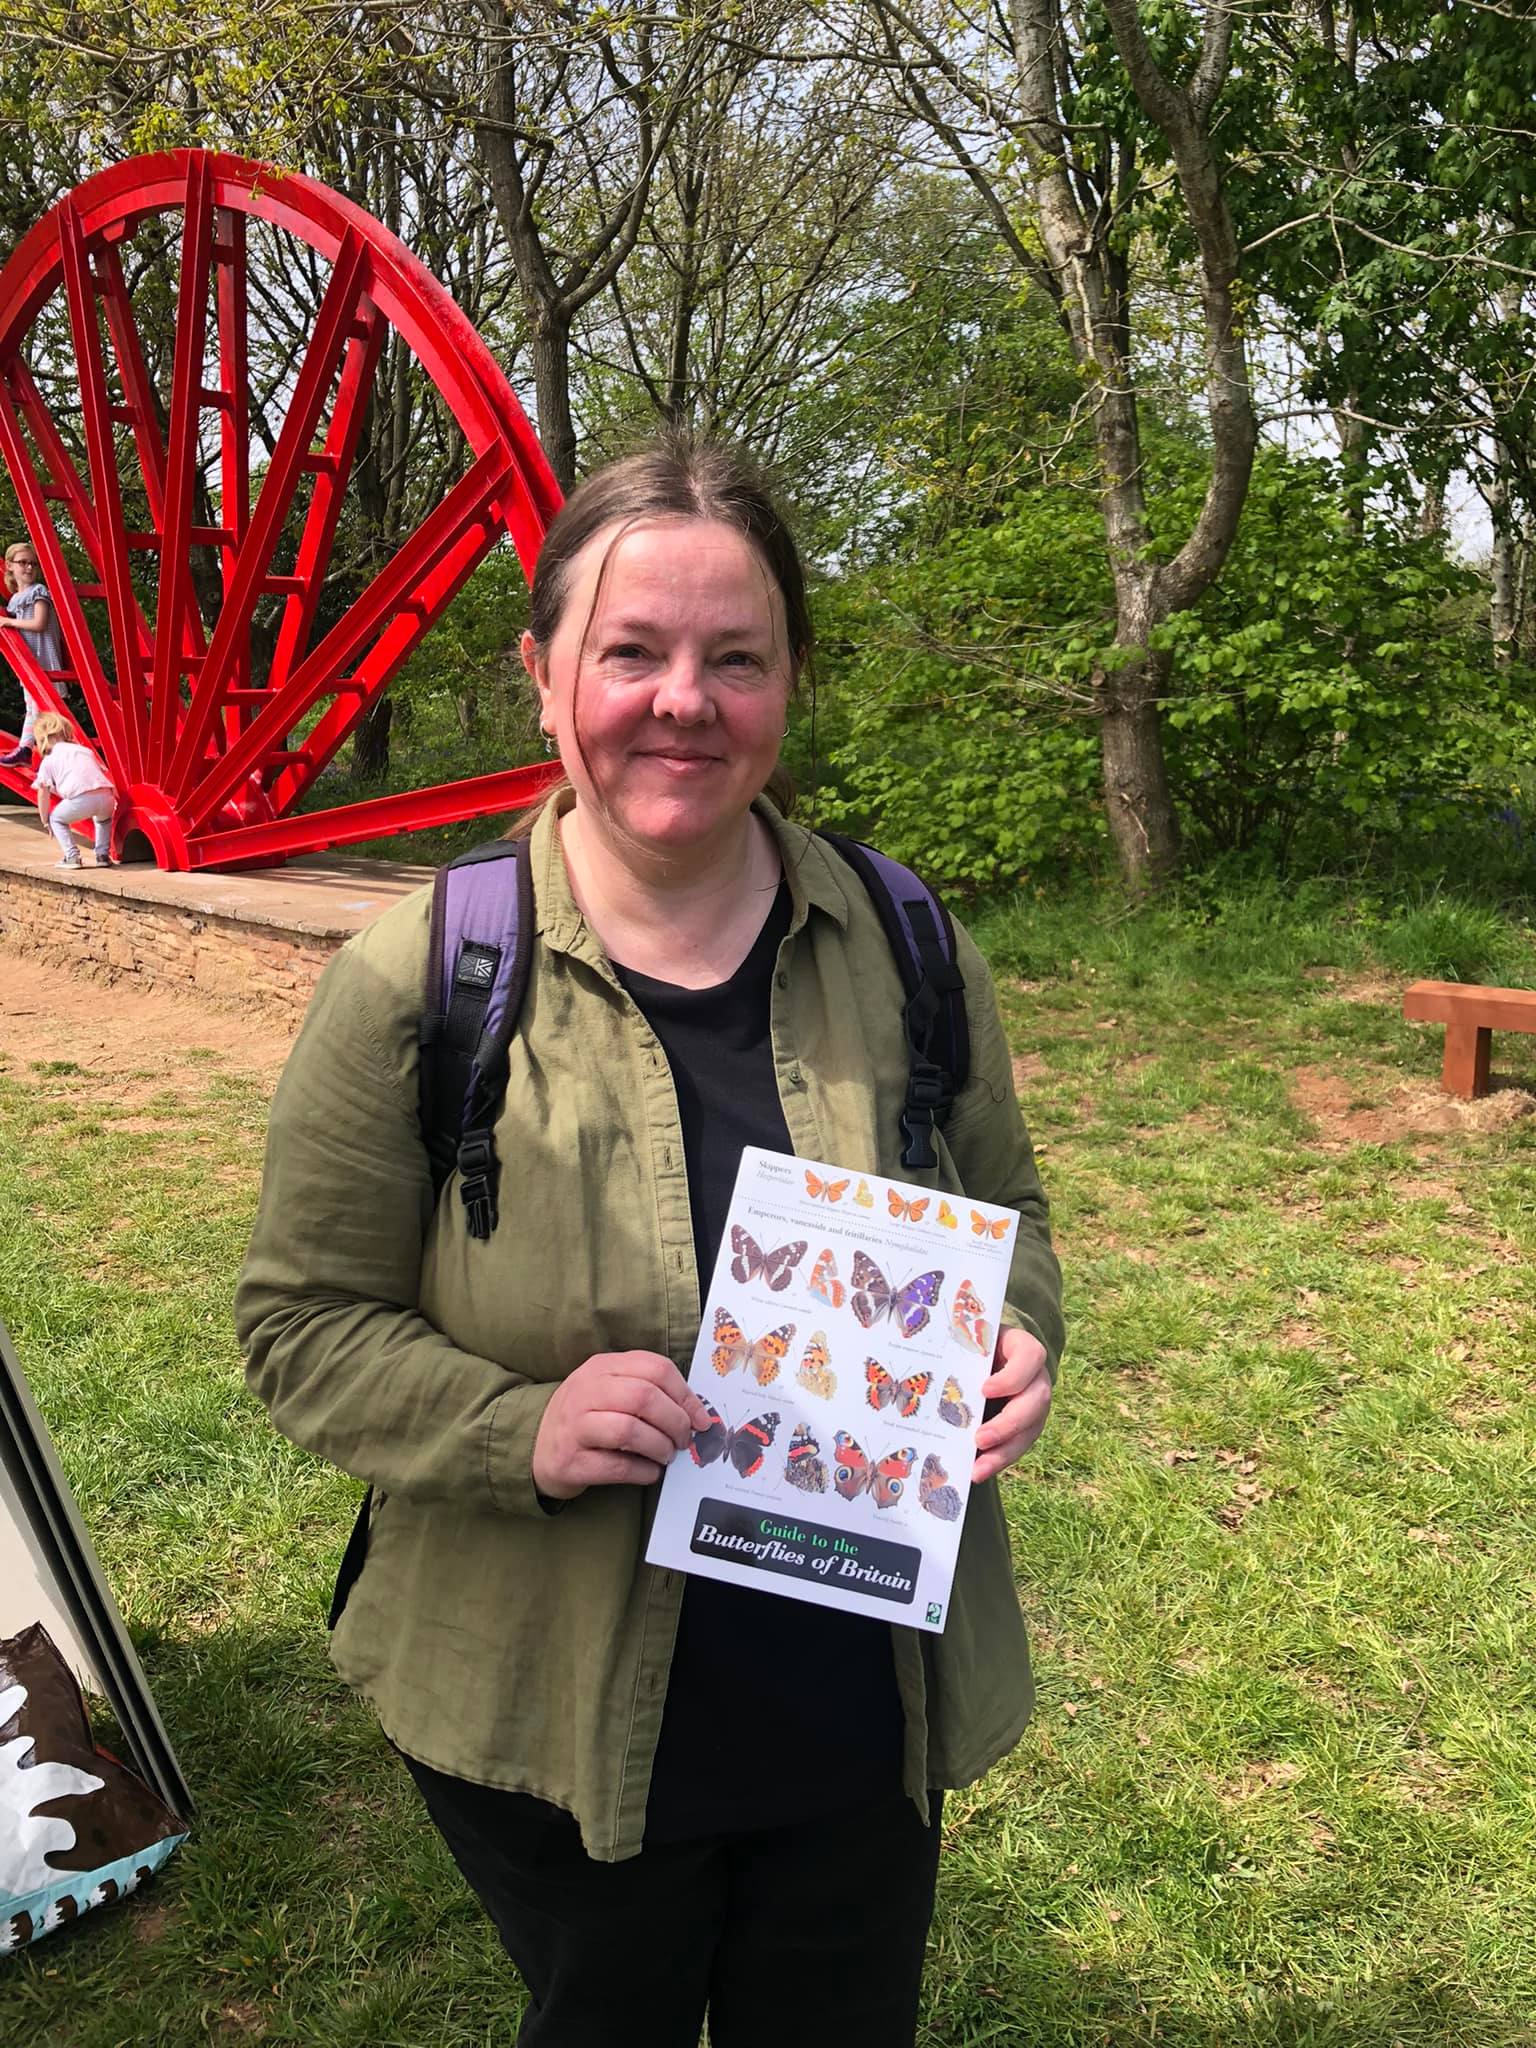 A person stands and smiles in front of the red Centenary wheel. They are holding a butterfly guide toward the camera.